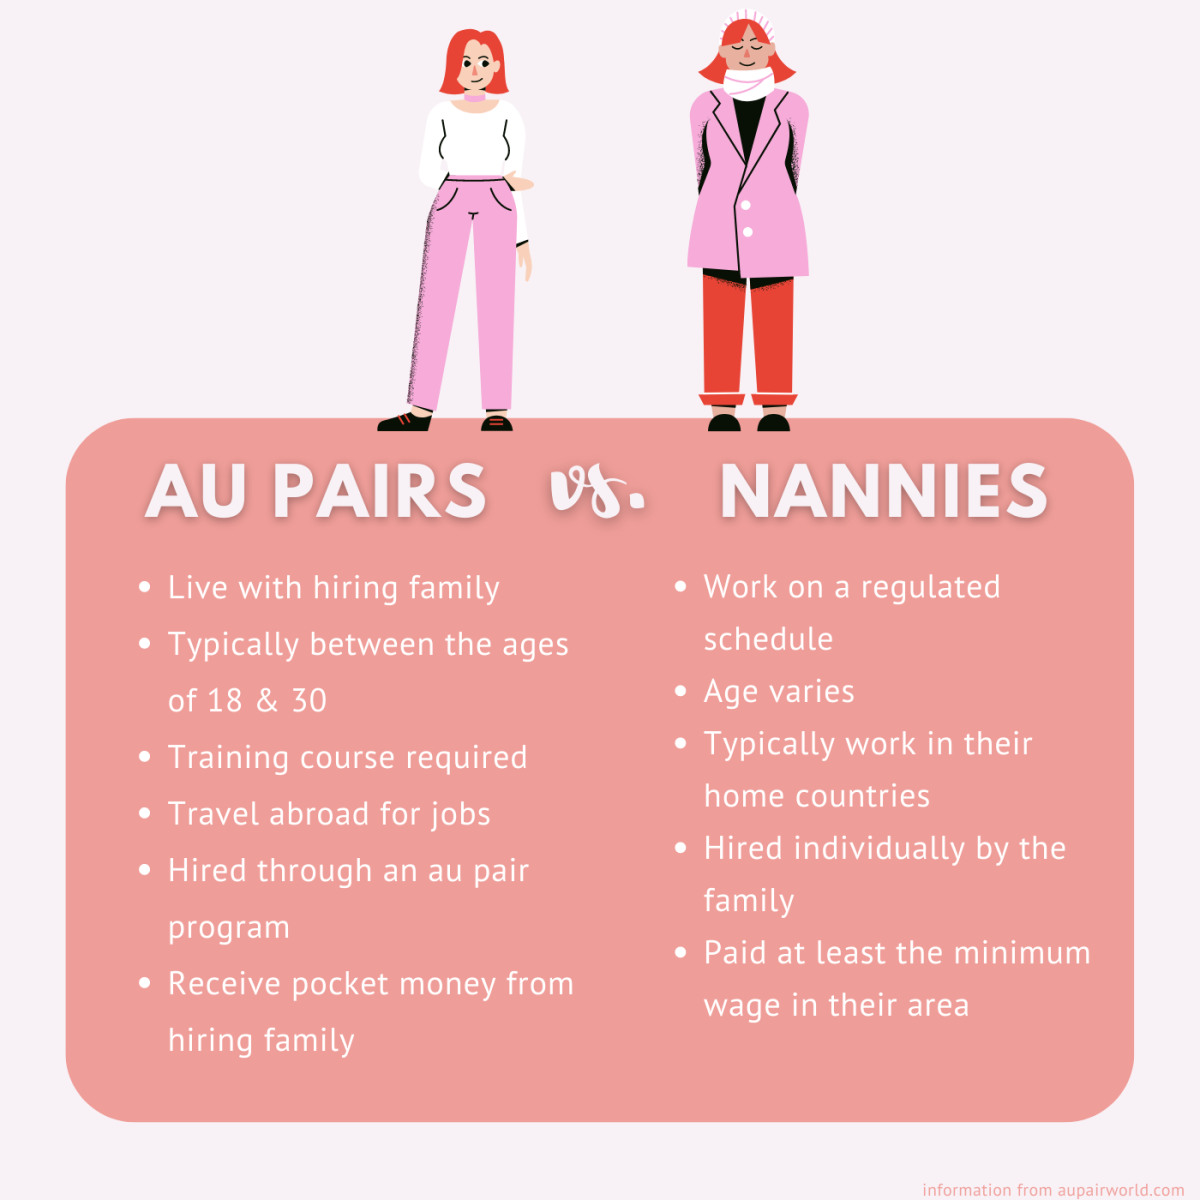 Though they both work in childcare, au pairs and nannies are quite different